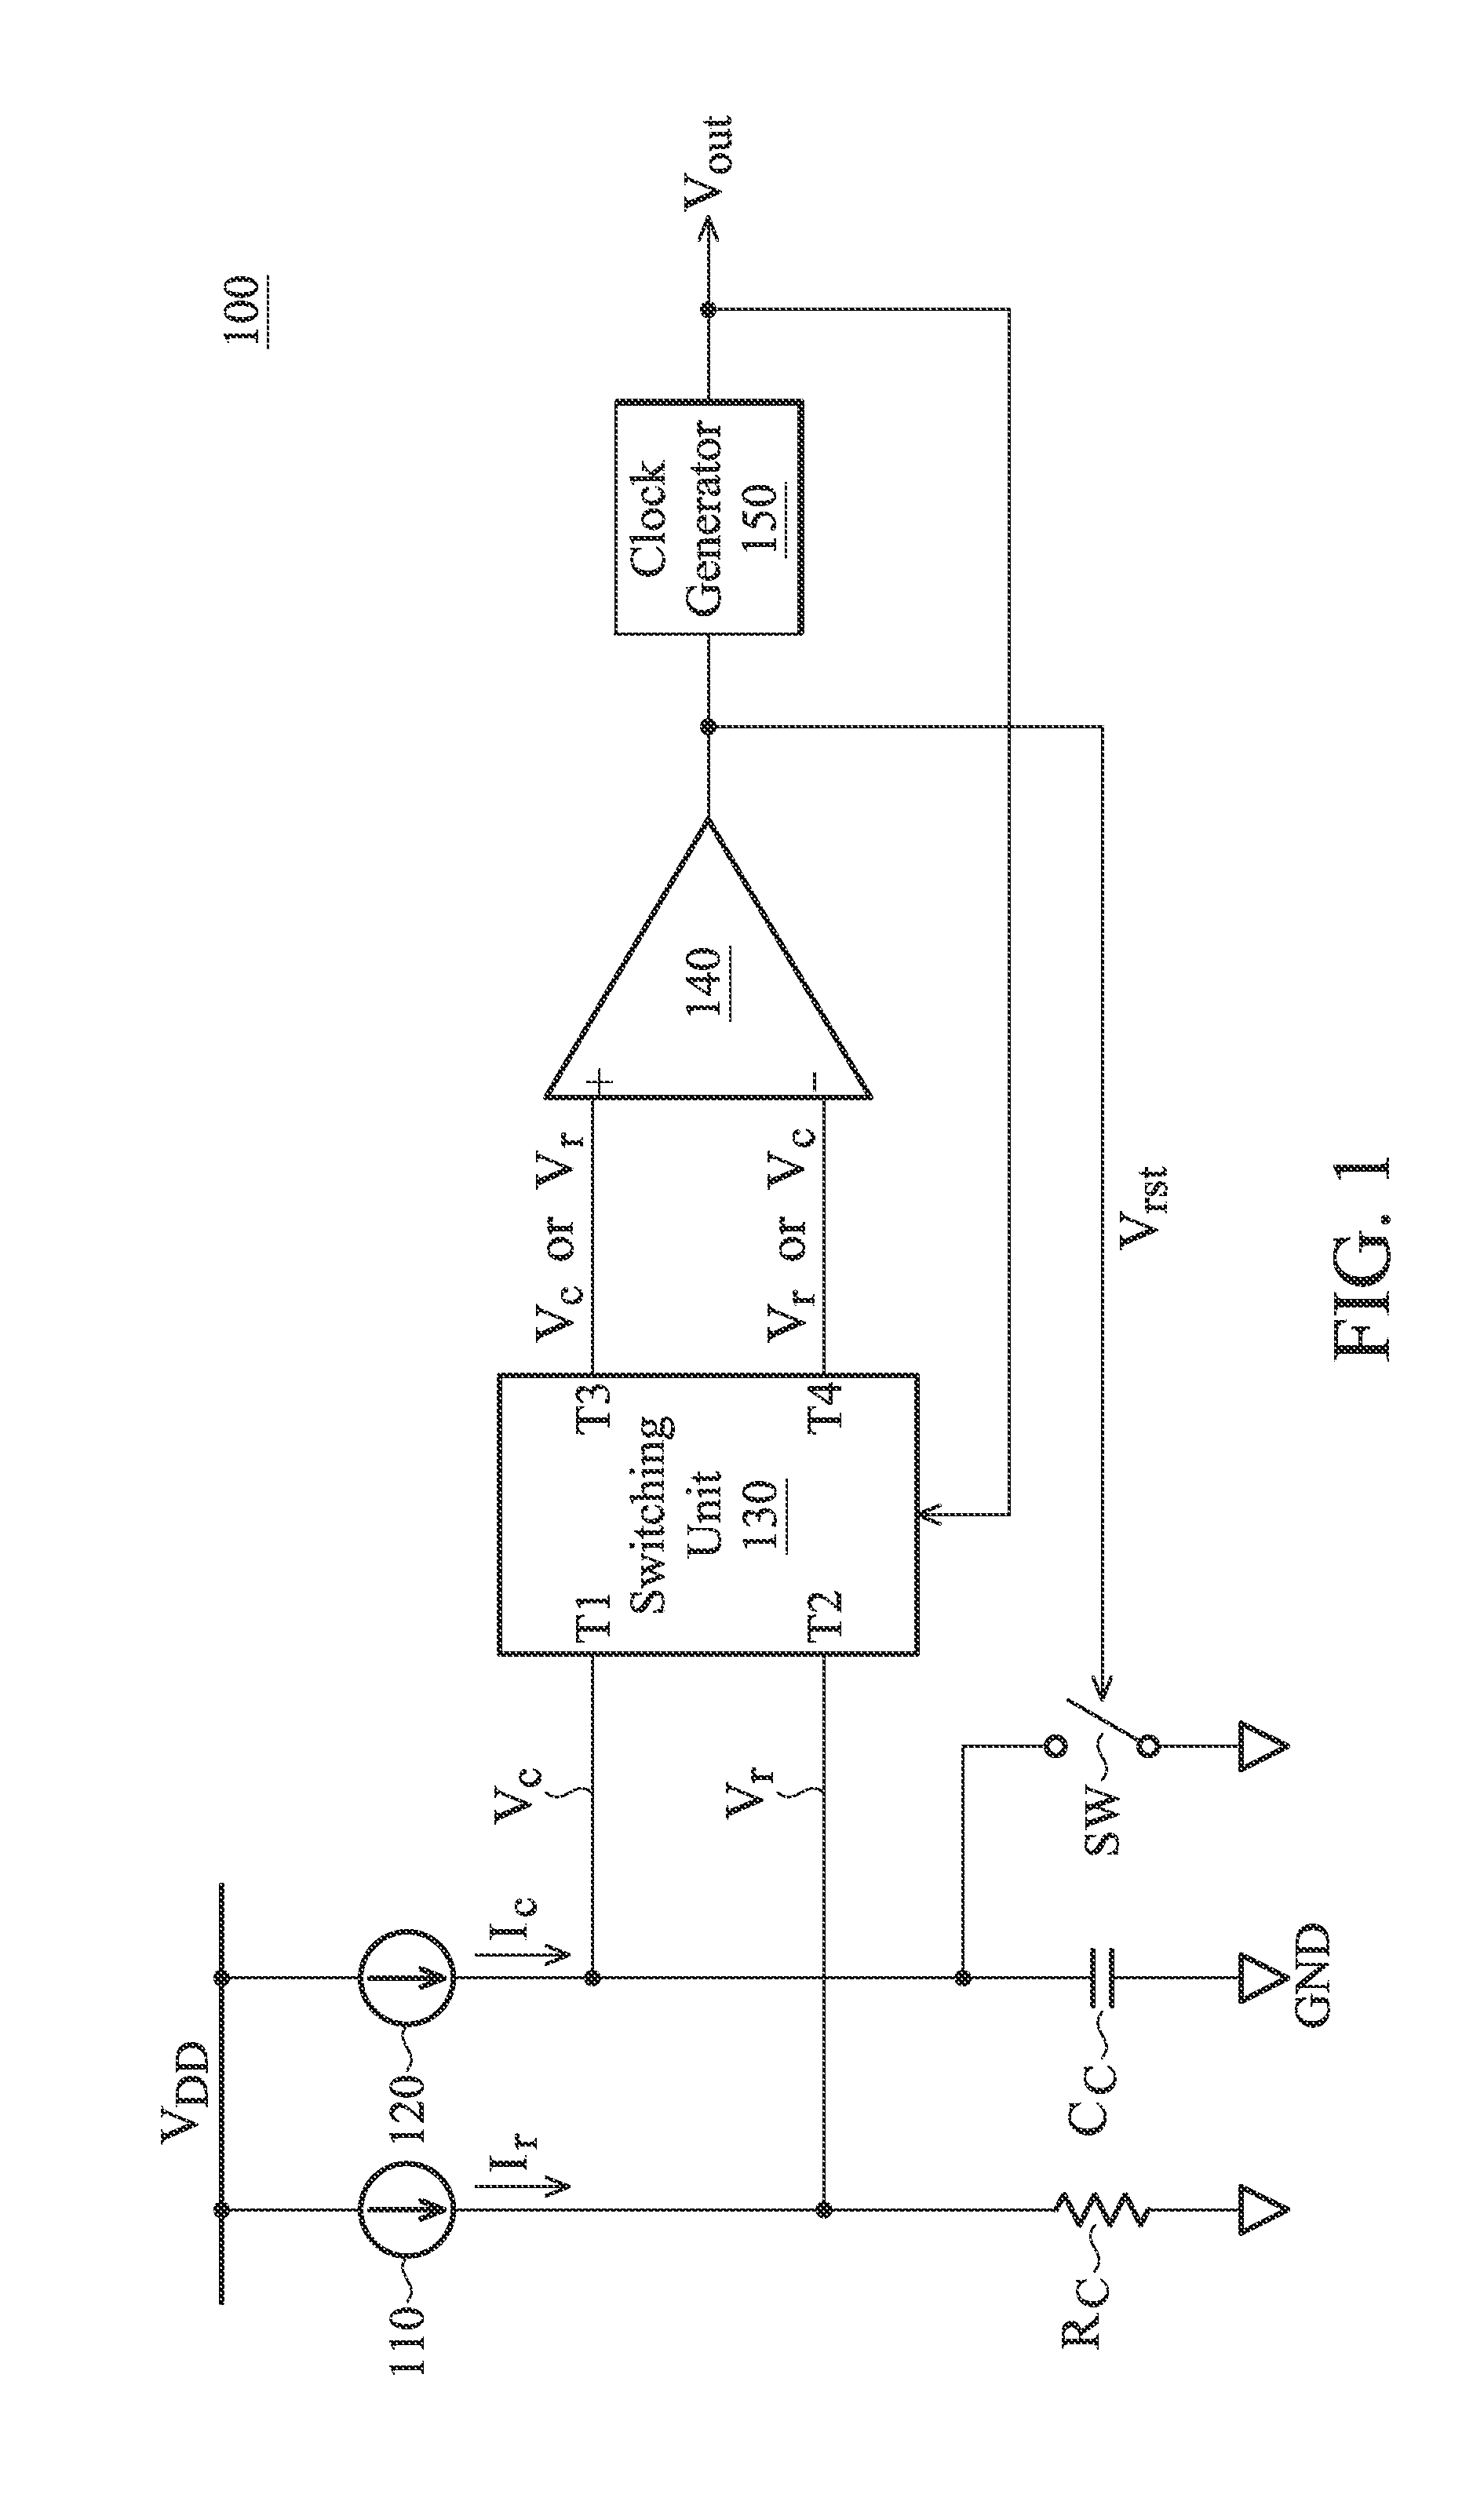 Comparator with transition threshold tracking capability